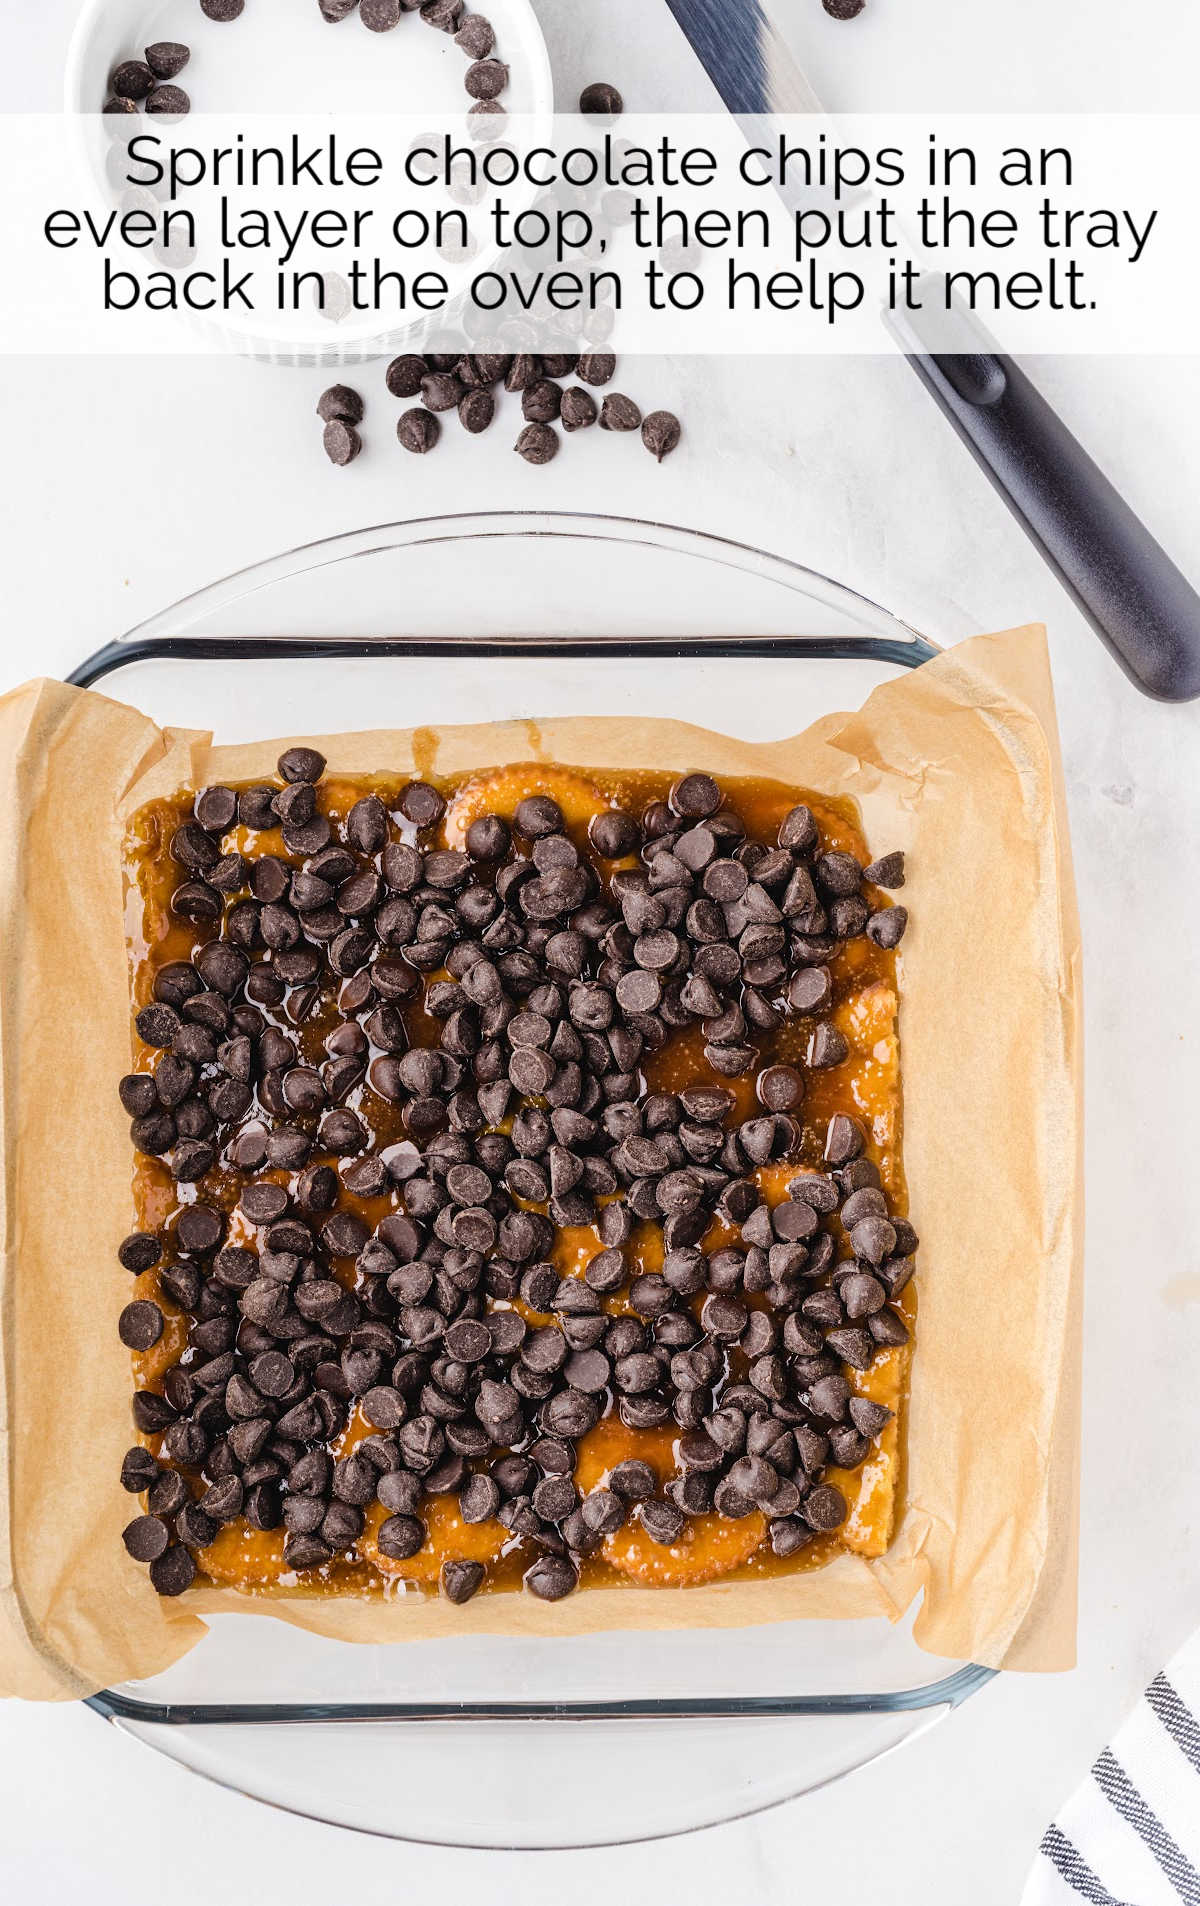 chocolate chips sprinkled on top of the caramel sauce